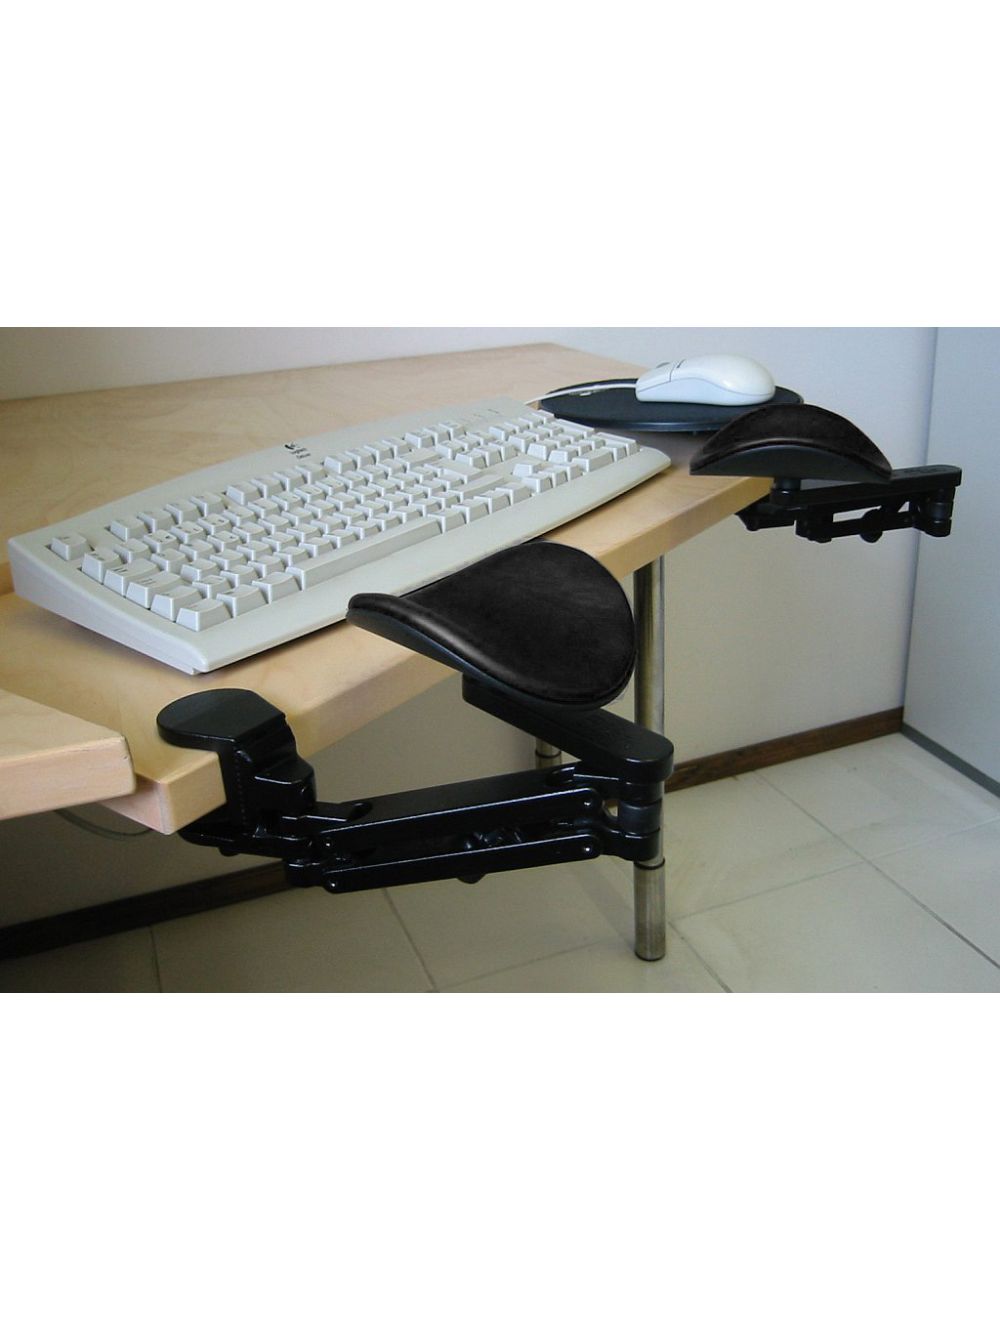 Ergorest Forearm Support con mouse pad